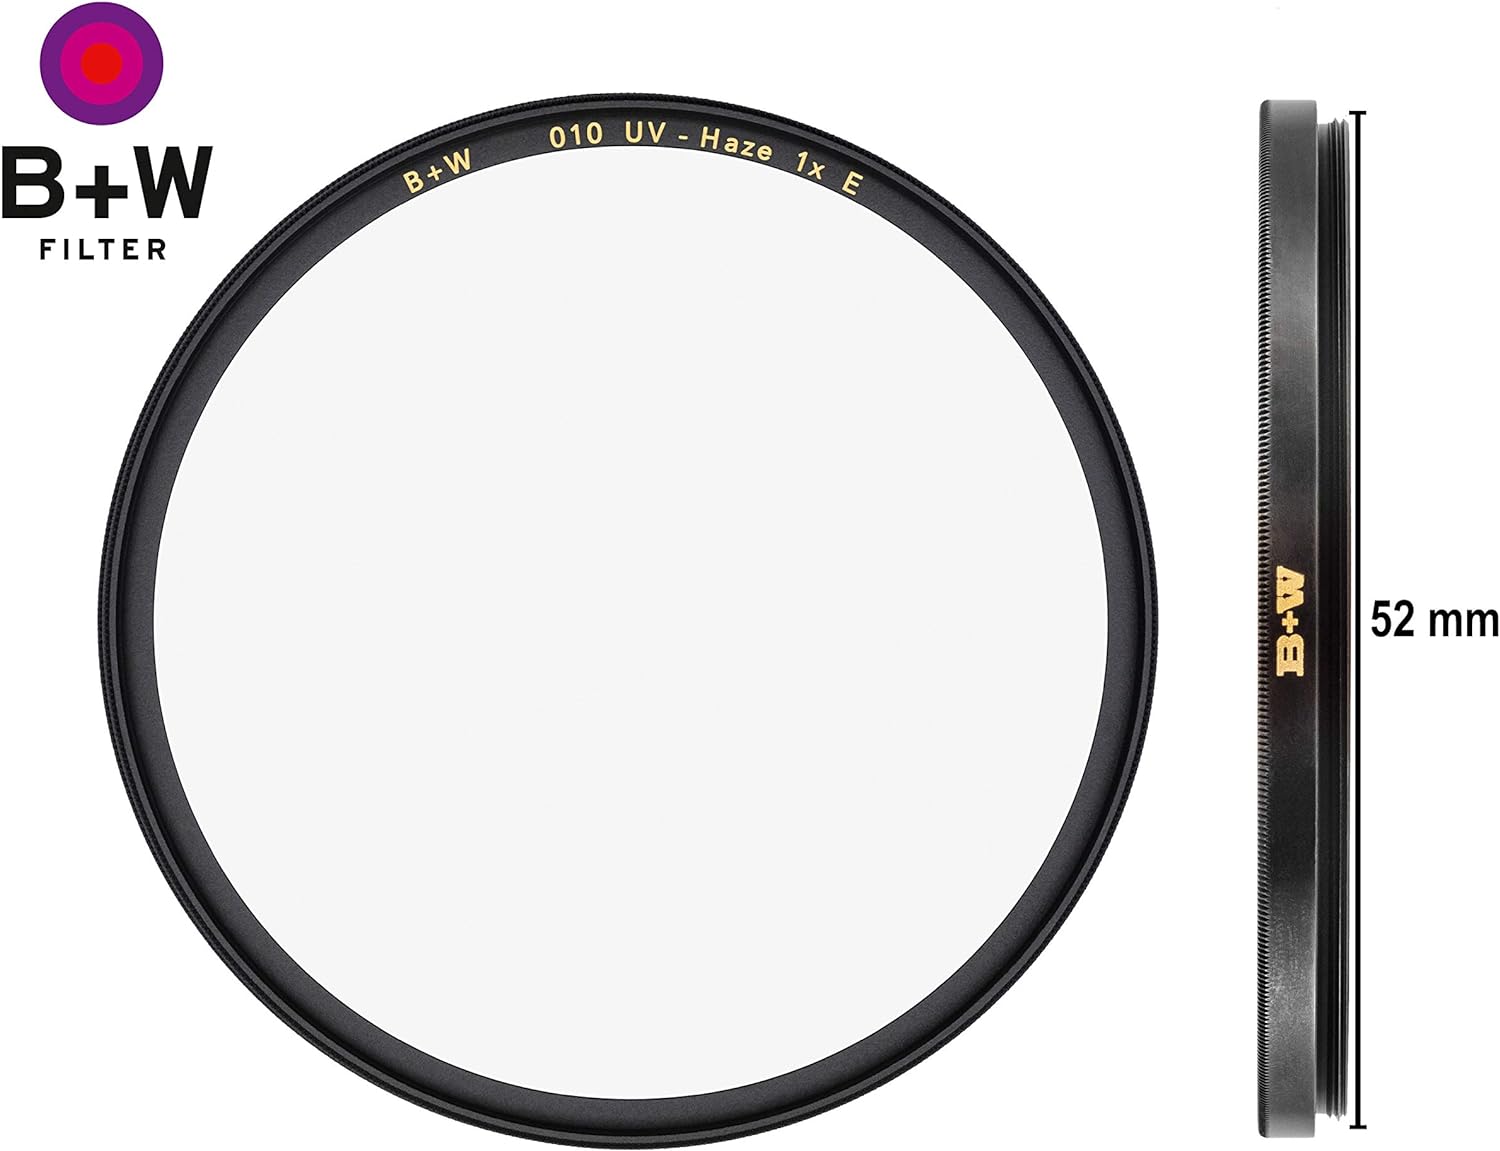 B + W 52mm UV Protection Filter (010) Review - Protect Your Precious Camera Lenses